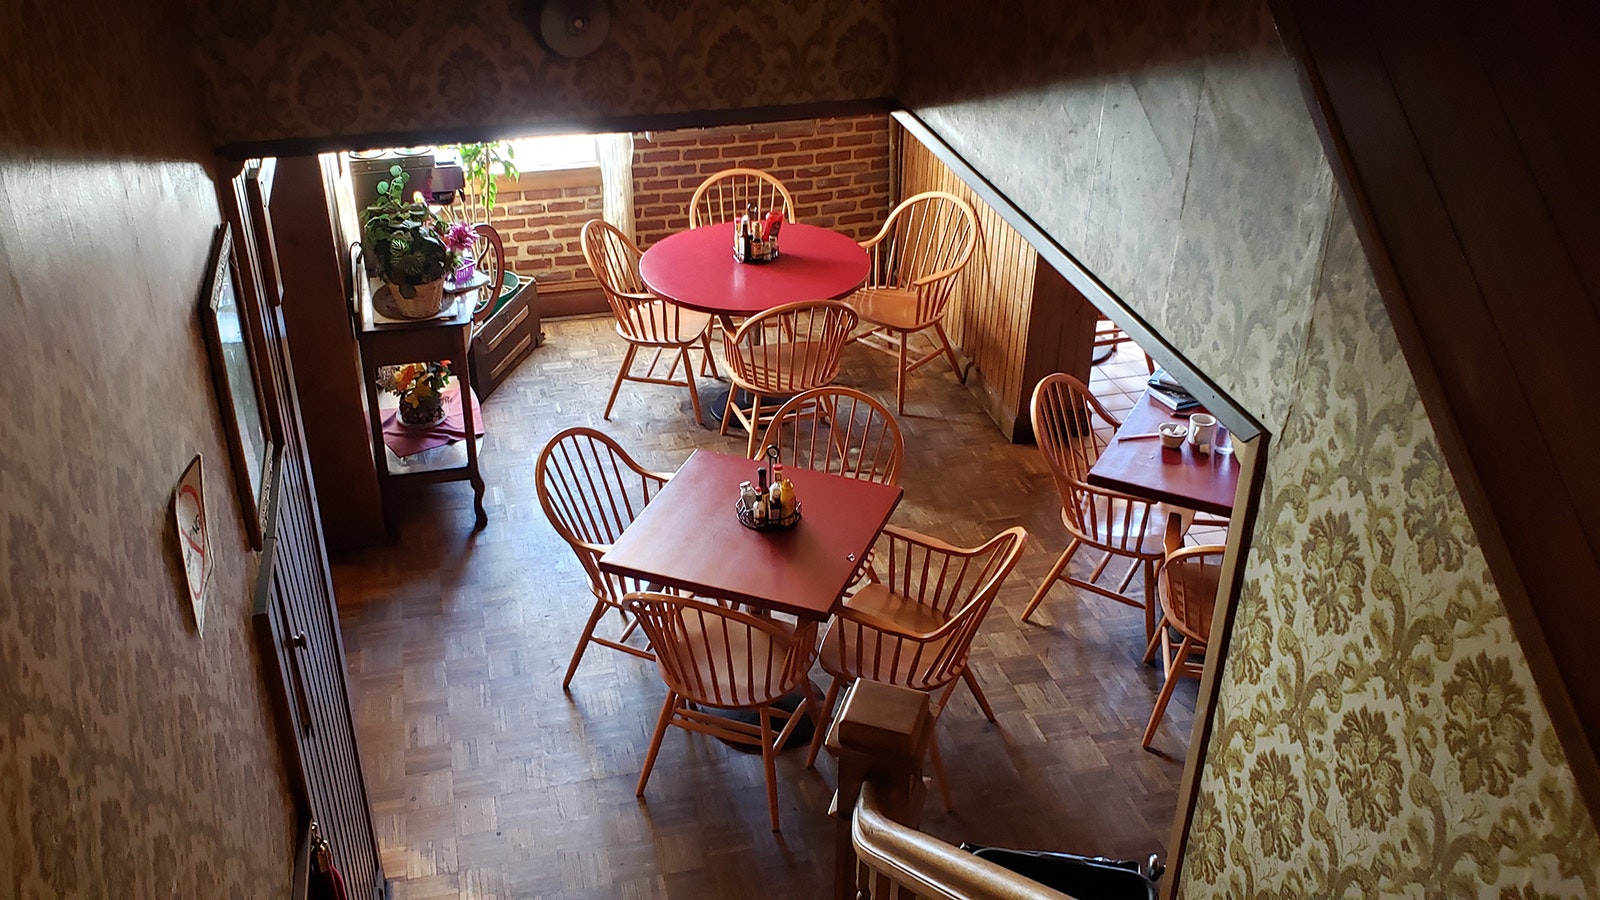 The café seen from above.